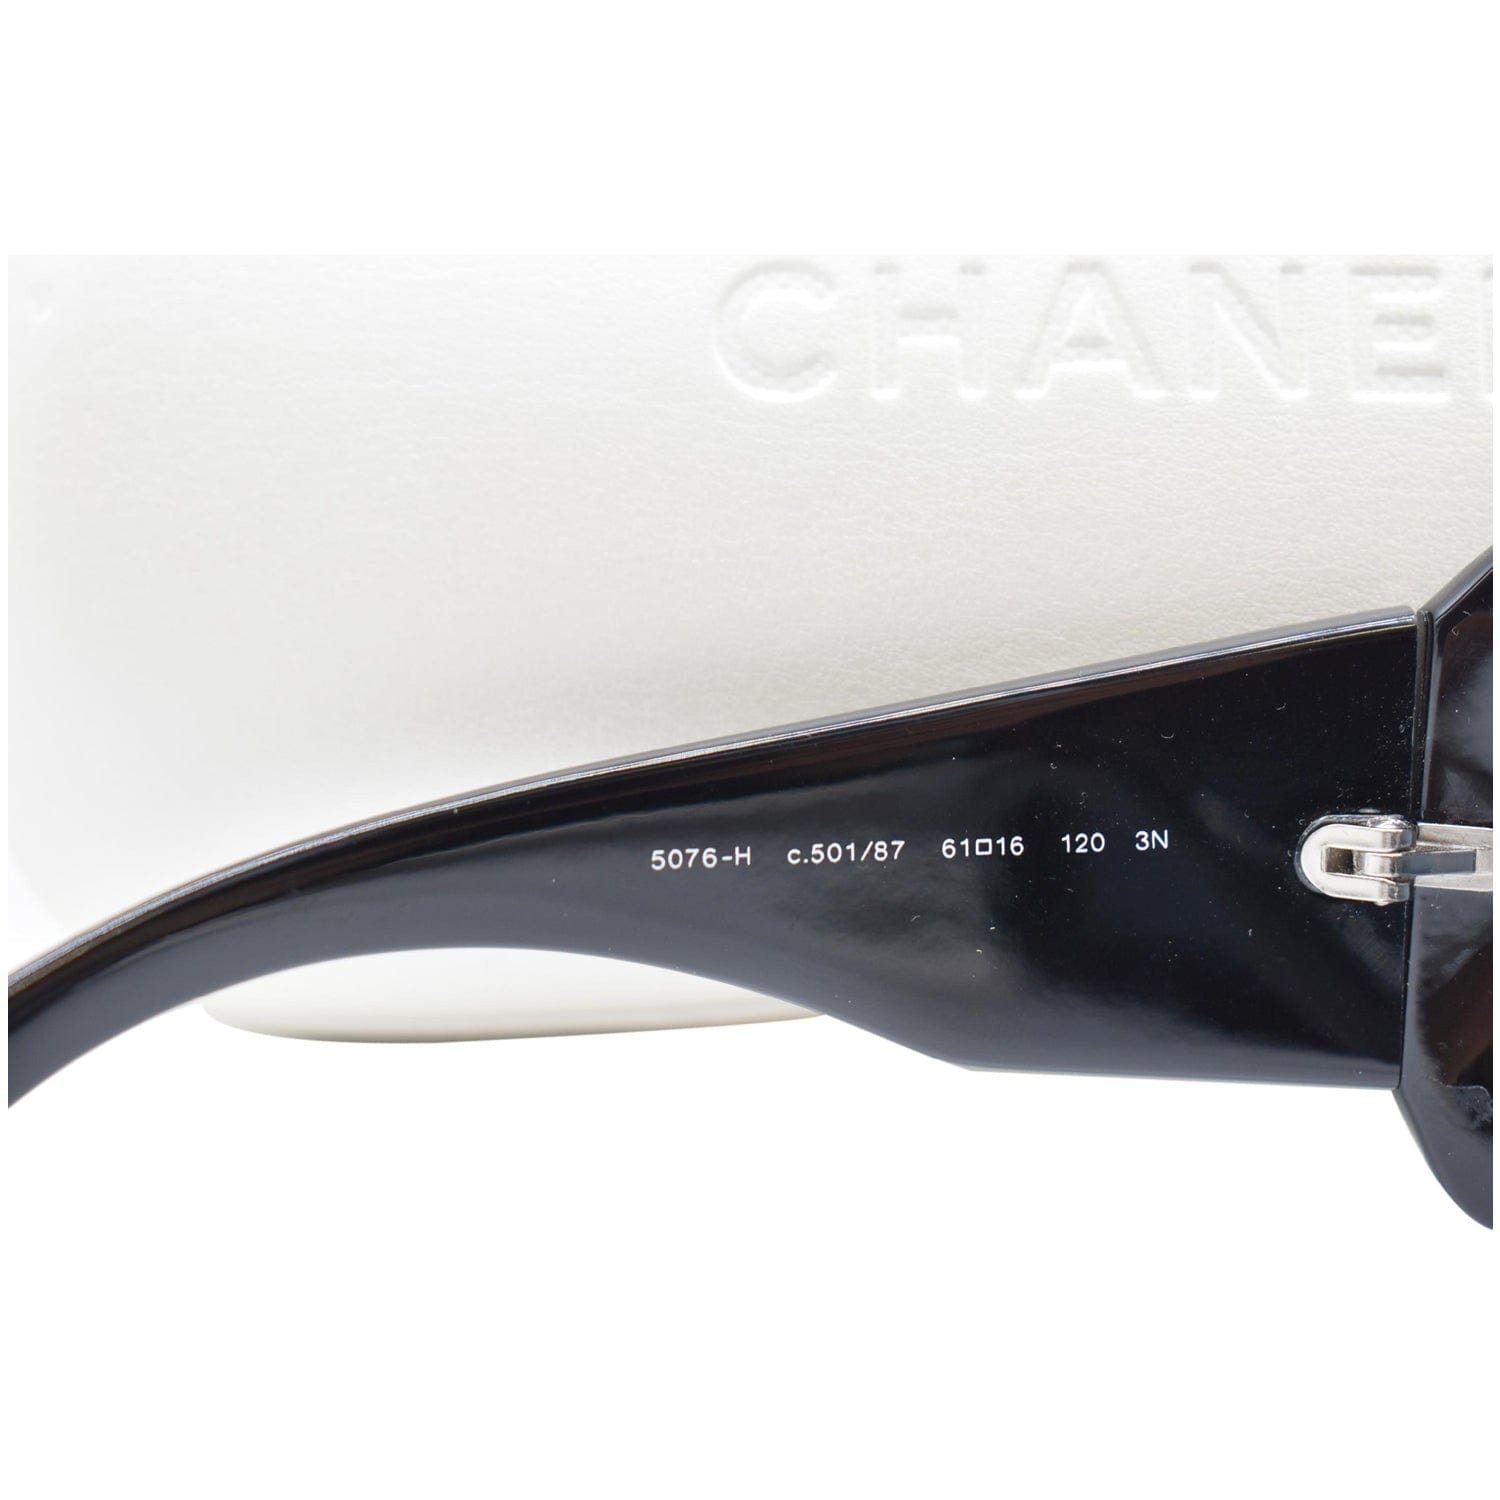 CHANEL Mother of Pearl 5076H Black Sunglasses Gray Lens